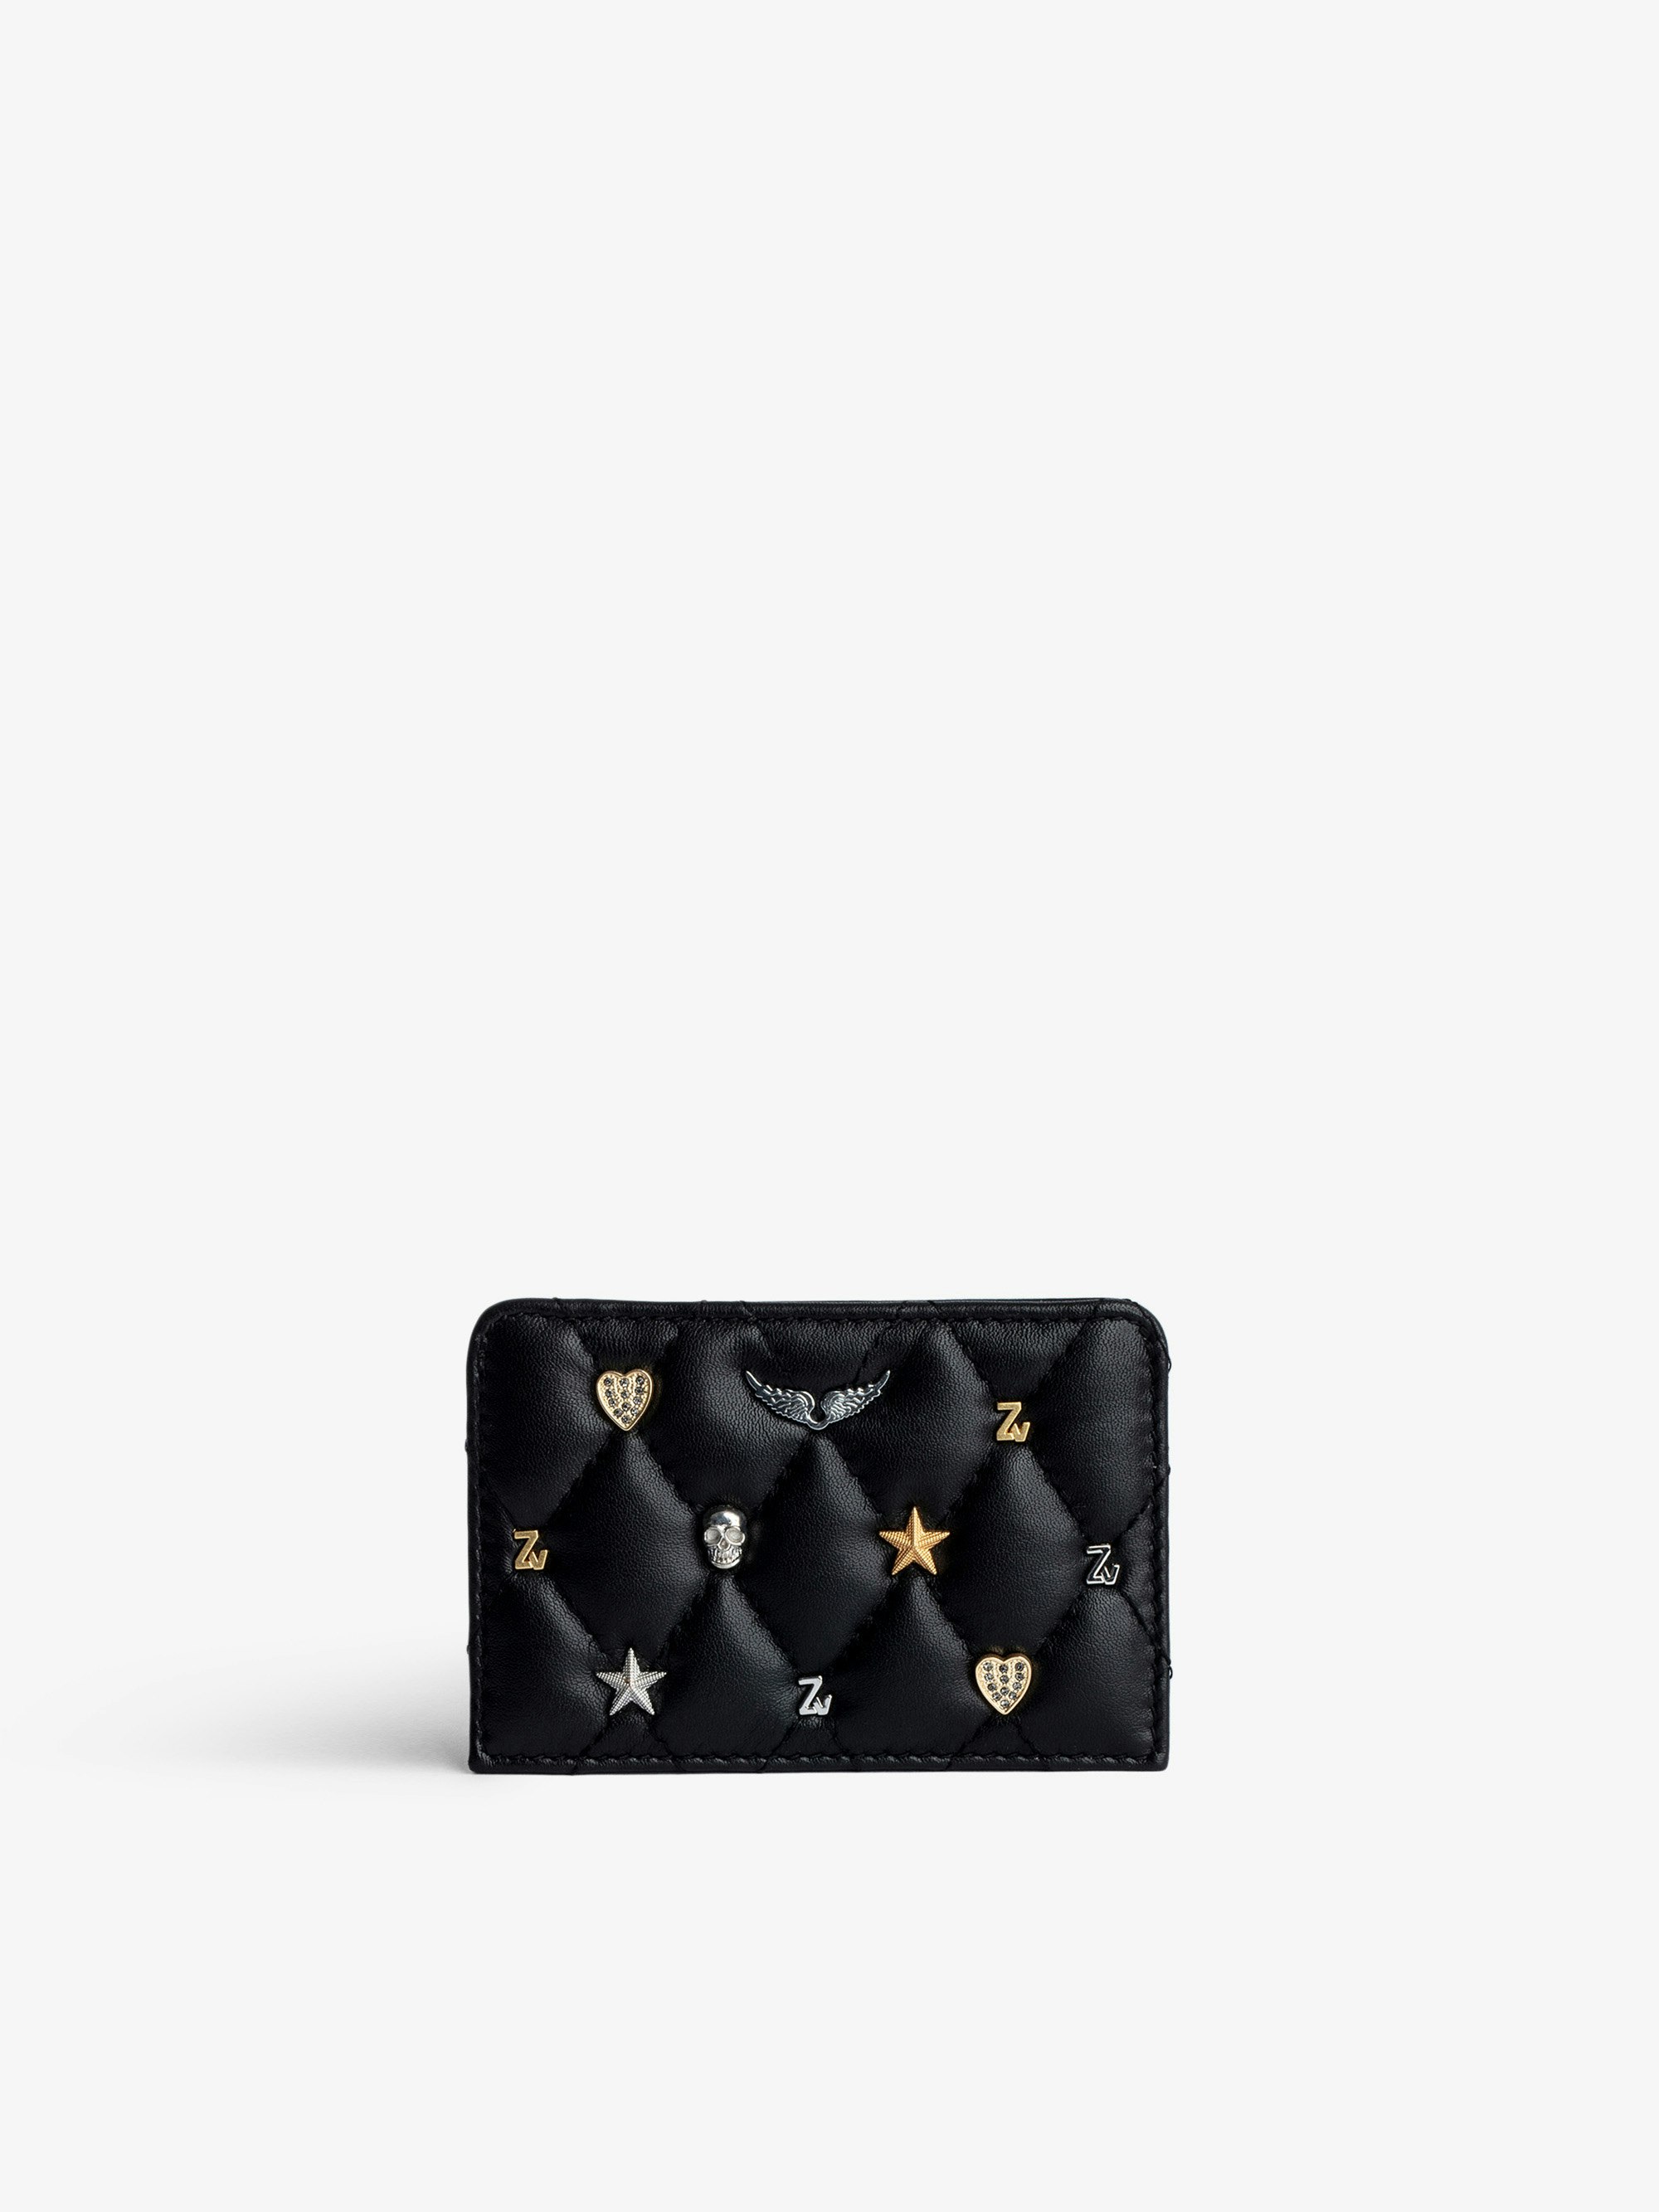 ZV Pass Card Holder - Women’s black quilted leather card holder with silver- and gold-tone charms.